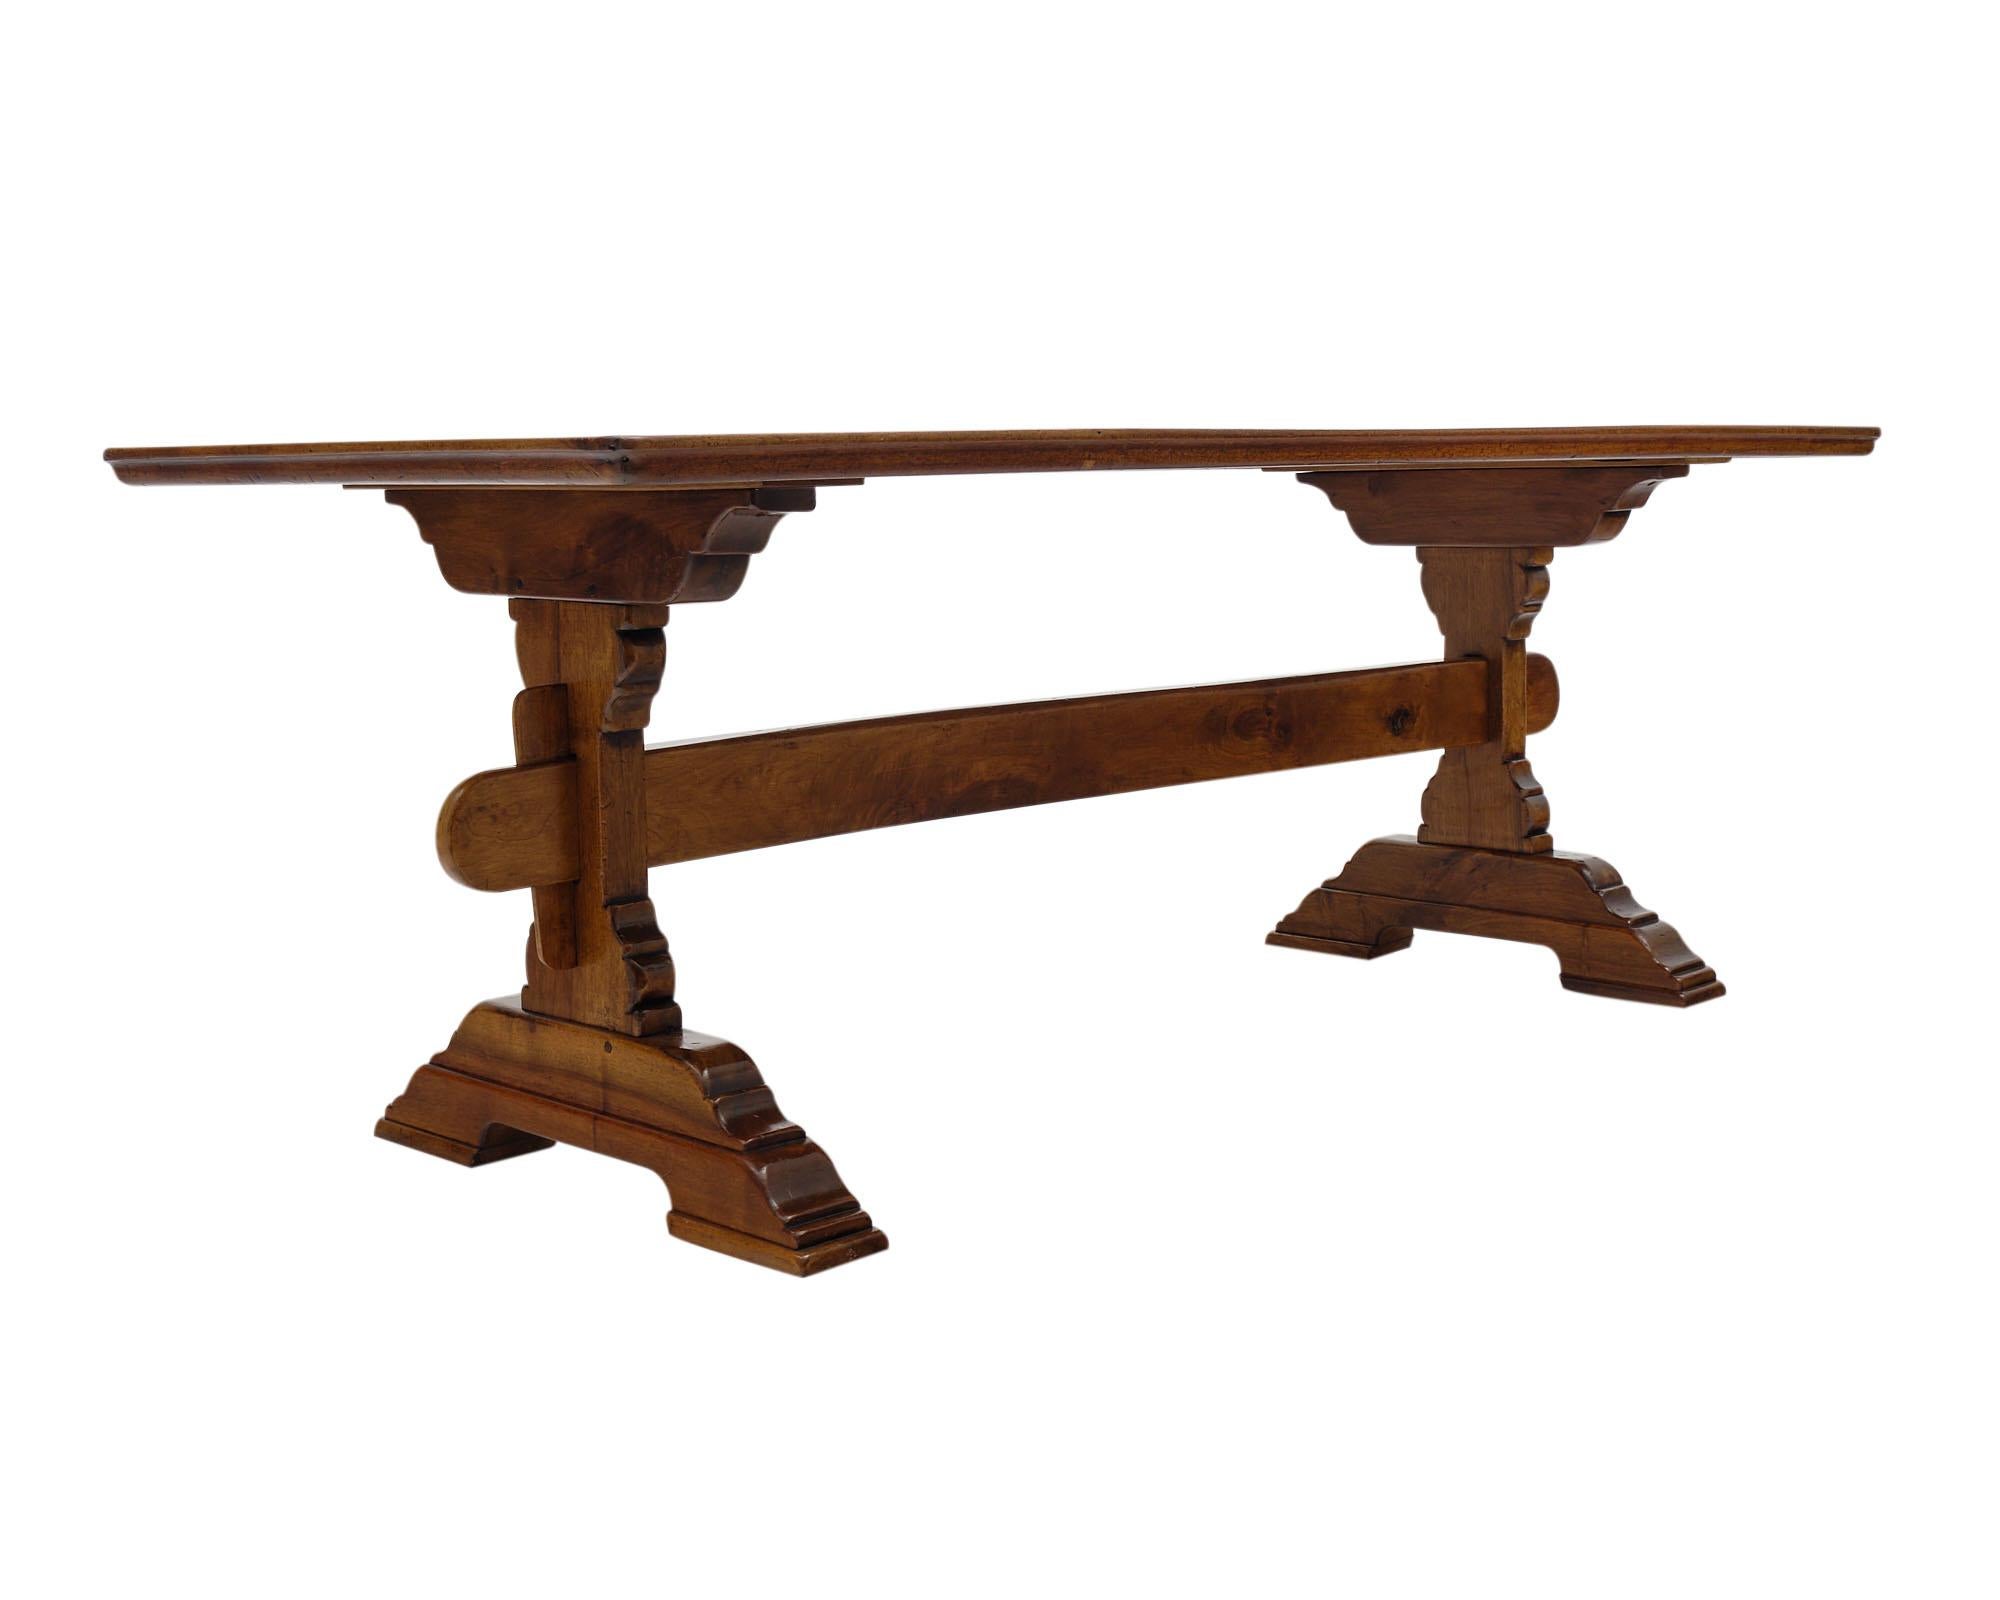 French monastery dining table from an “abbaye” in the Rhone Valley. This piece is made of solid walnut and features an inlayed single plank top and hand carved double pedestals connected with an oblong stretcher.